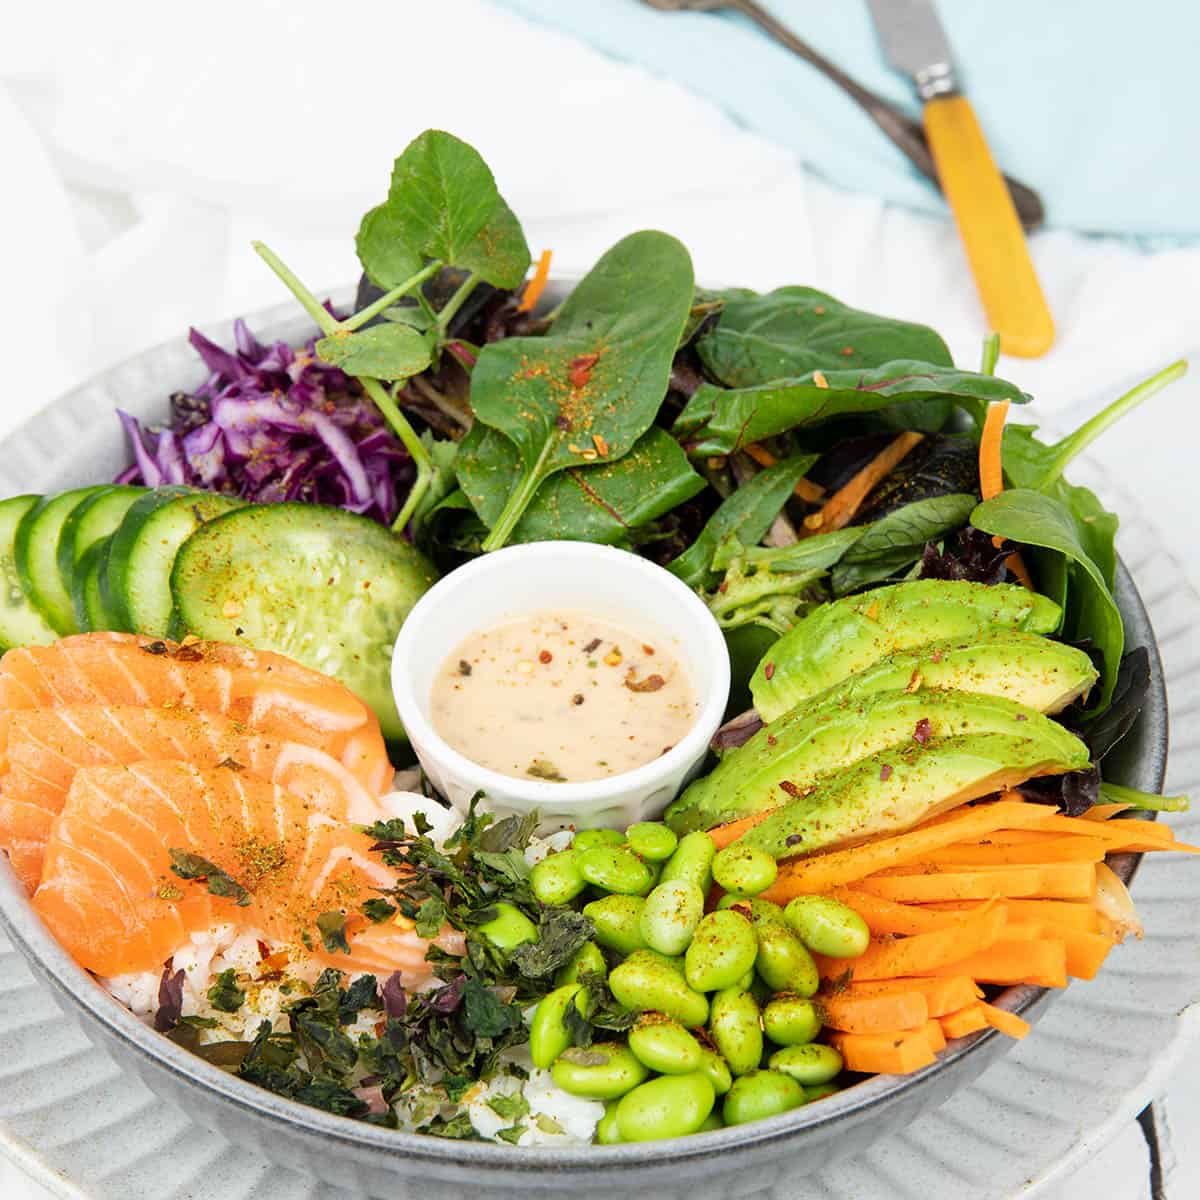 Poke bowl on a grey plate and white background include salad items and salmon